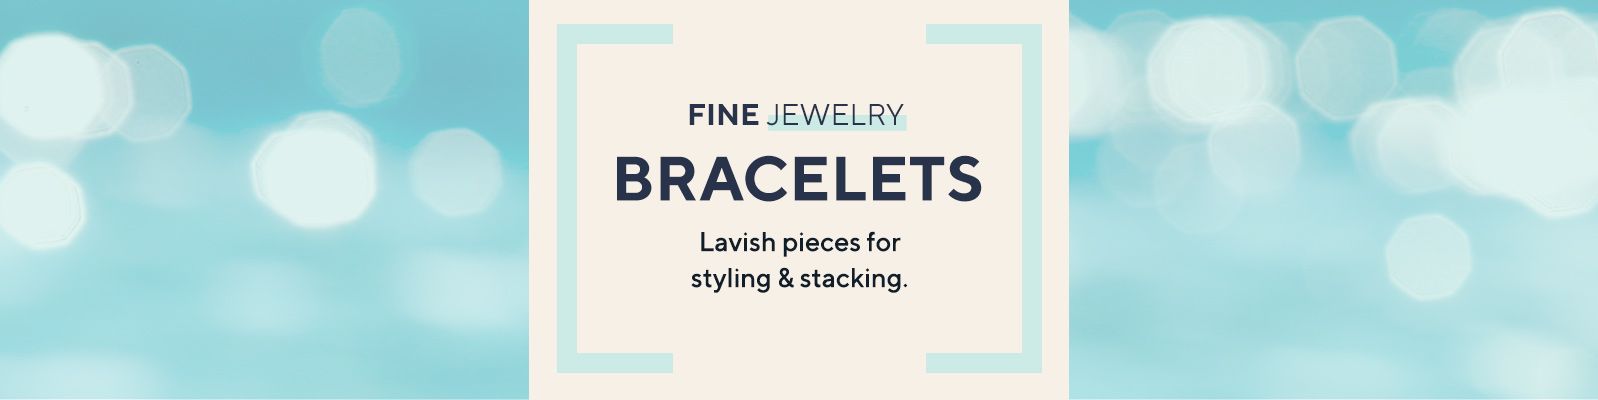 Fine Jewelry - Bracelets - Lavish pieces for styling & stacking.